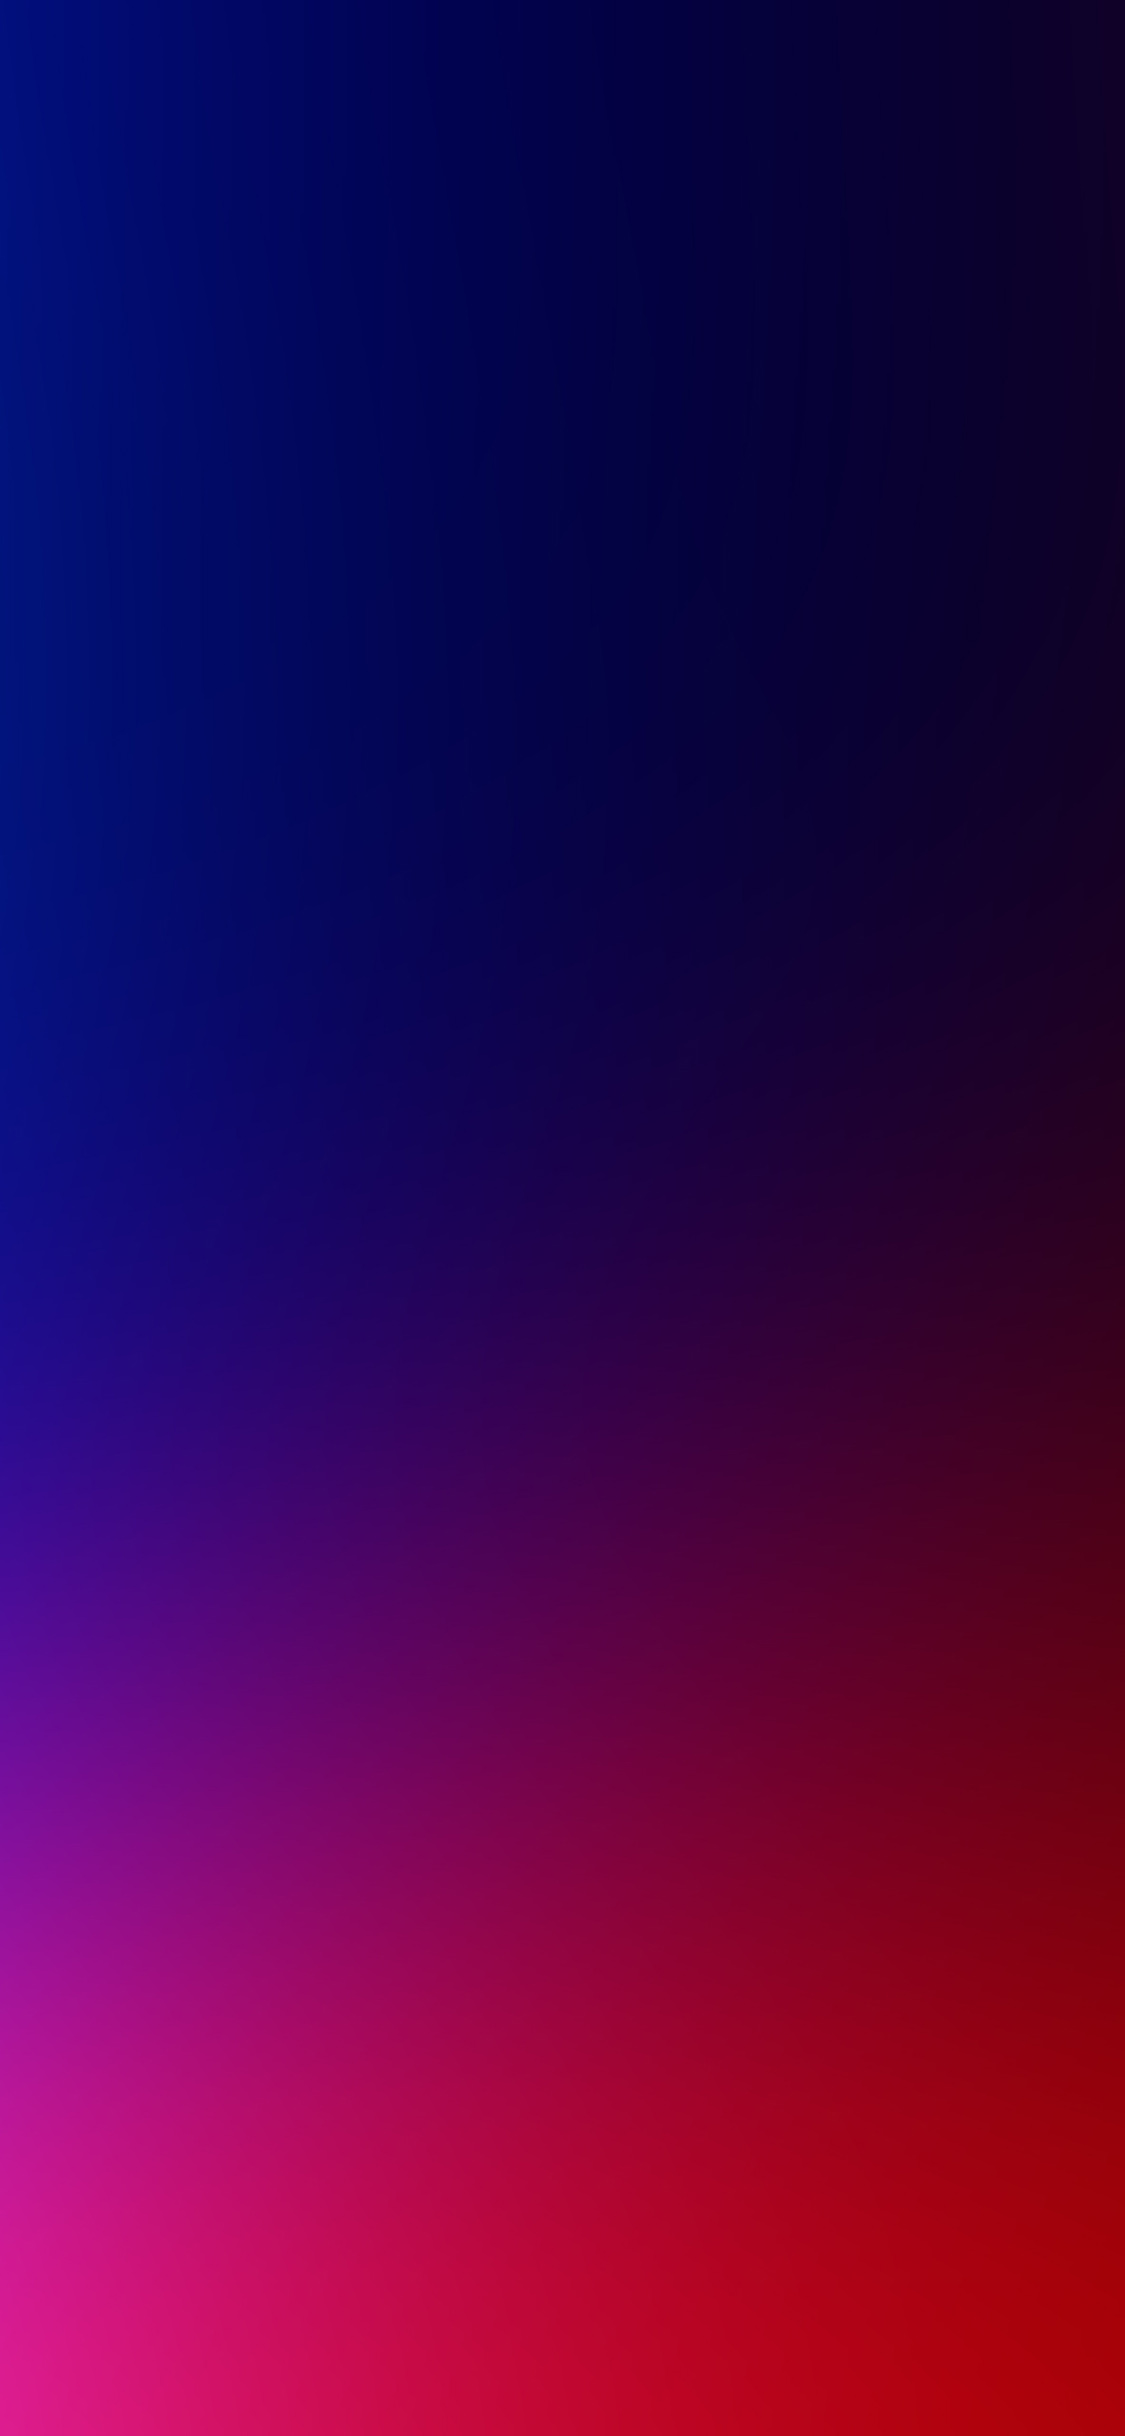 Blue Red iPhone X Wallpaper & Background Download